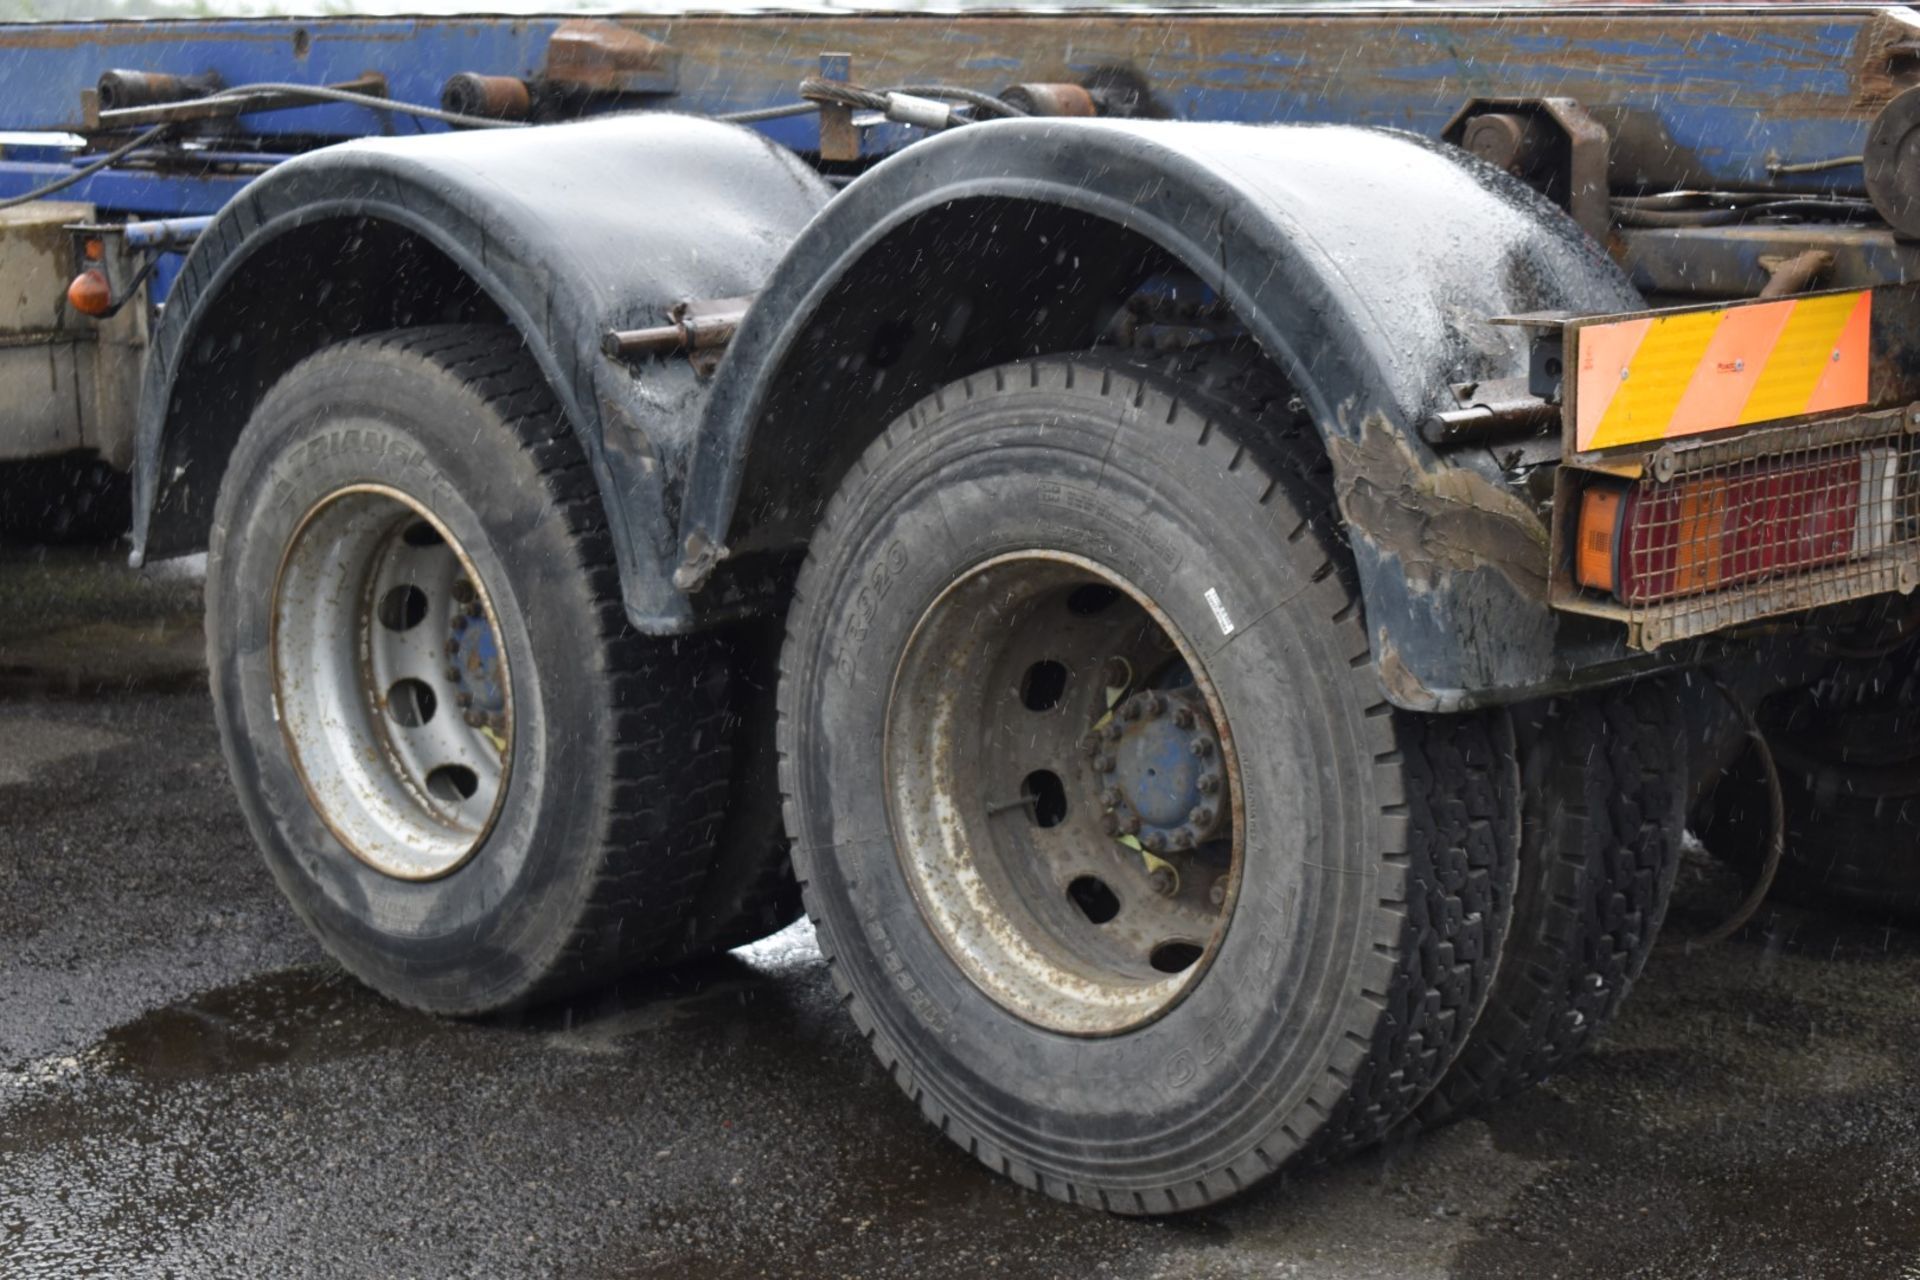 1 x Volvo 340 Plant Lorry With Tipper Chasis and Fitted Winch - CL547 - Location: South Yorkshire. - Image 8 of 25